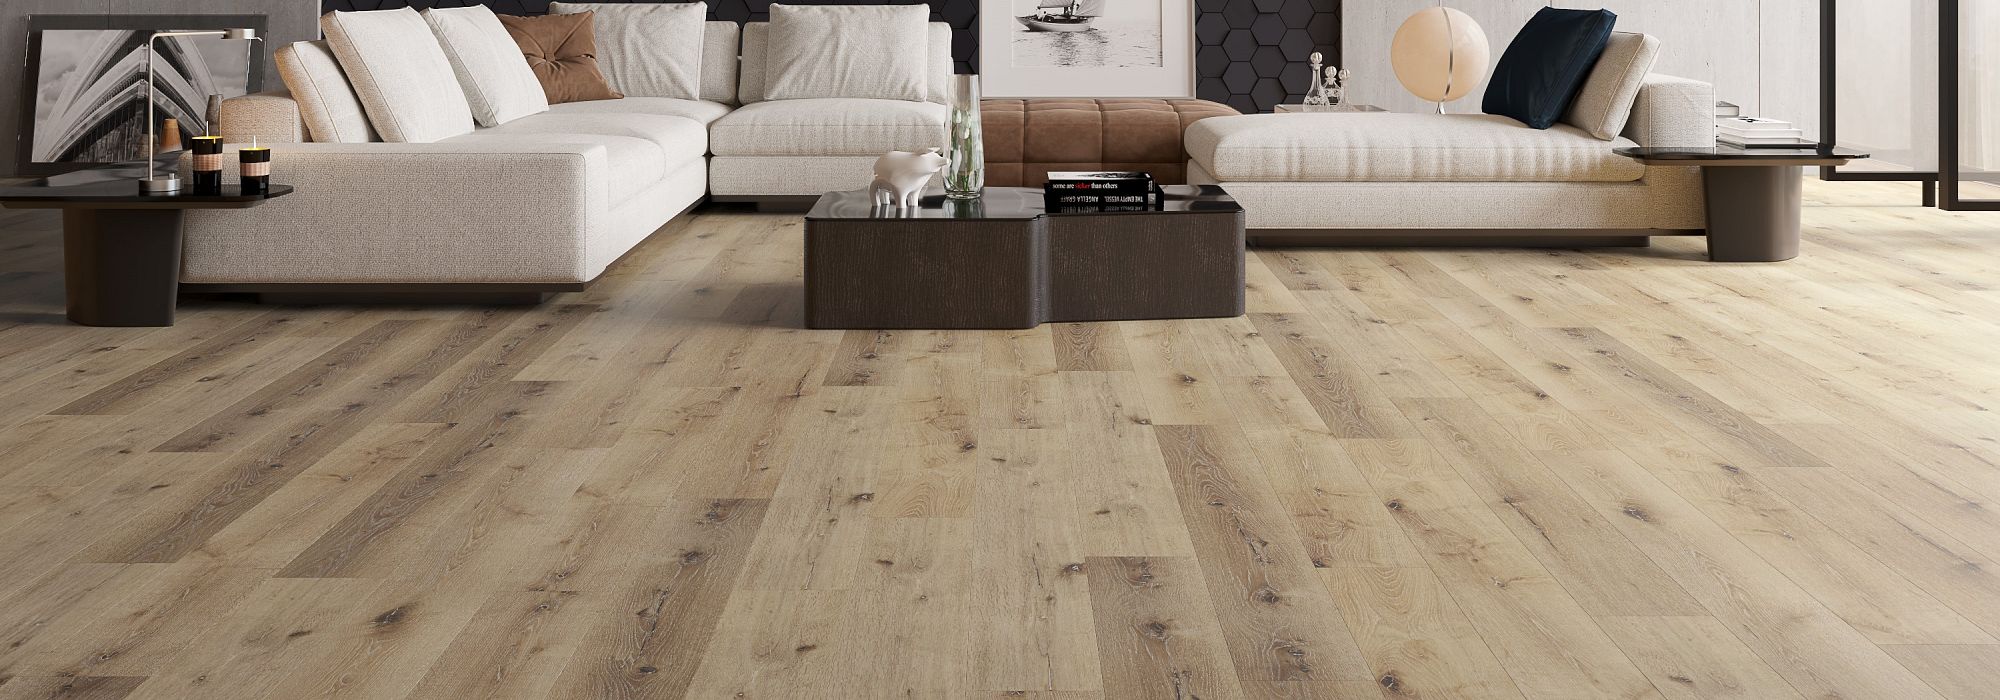 Flooring <strong>100% Waterproof</strong> with 35 year warranty.